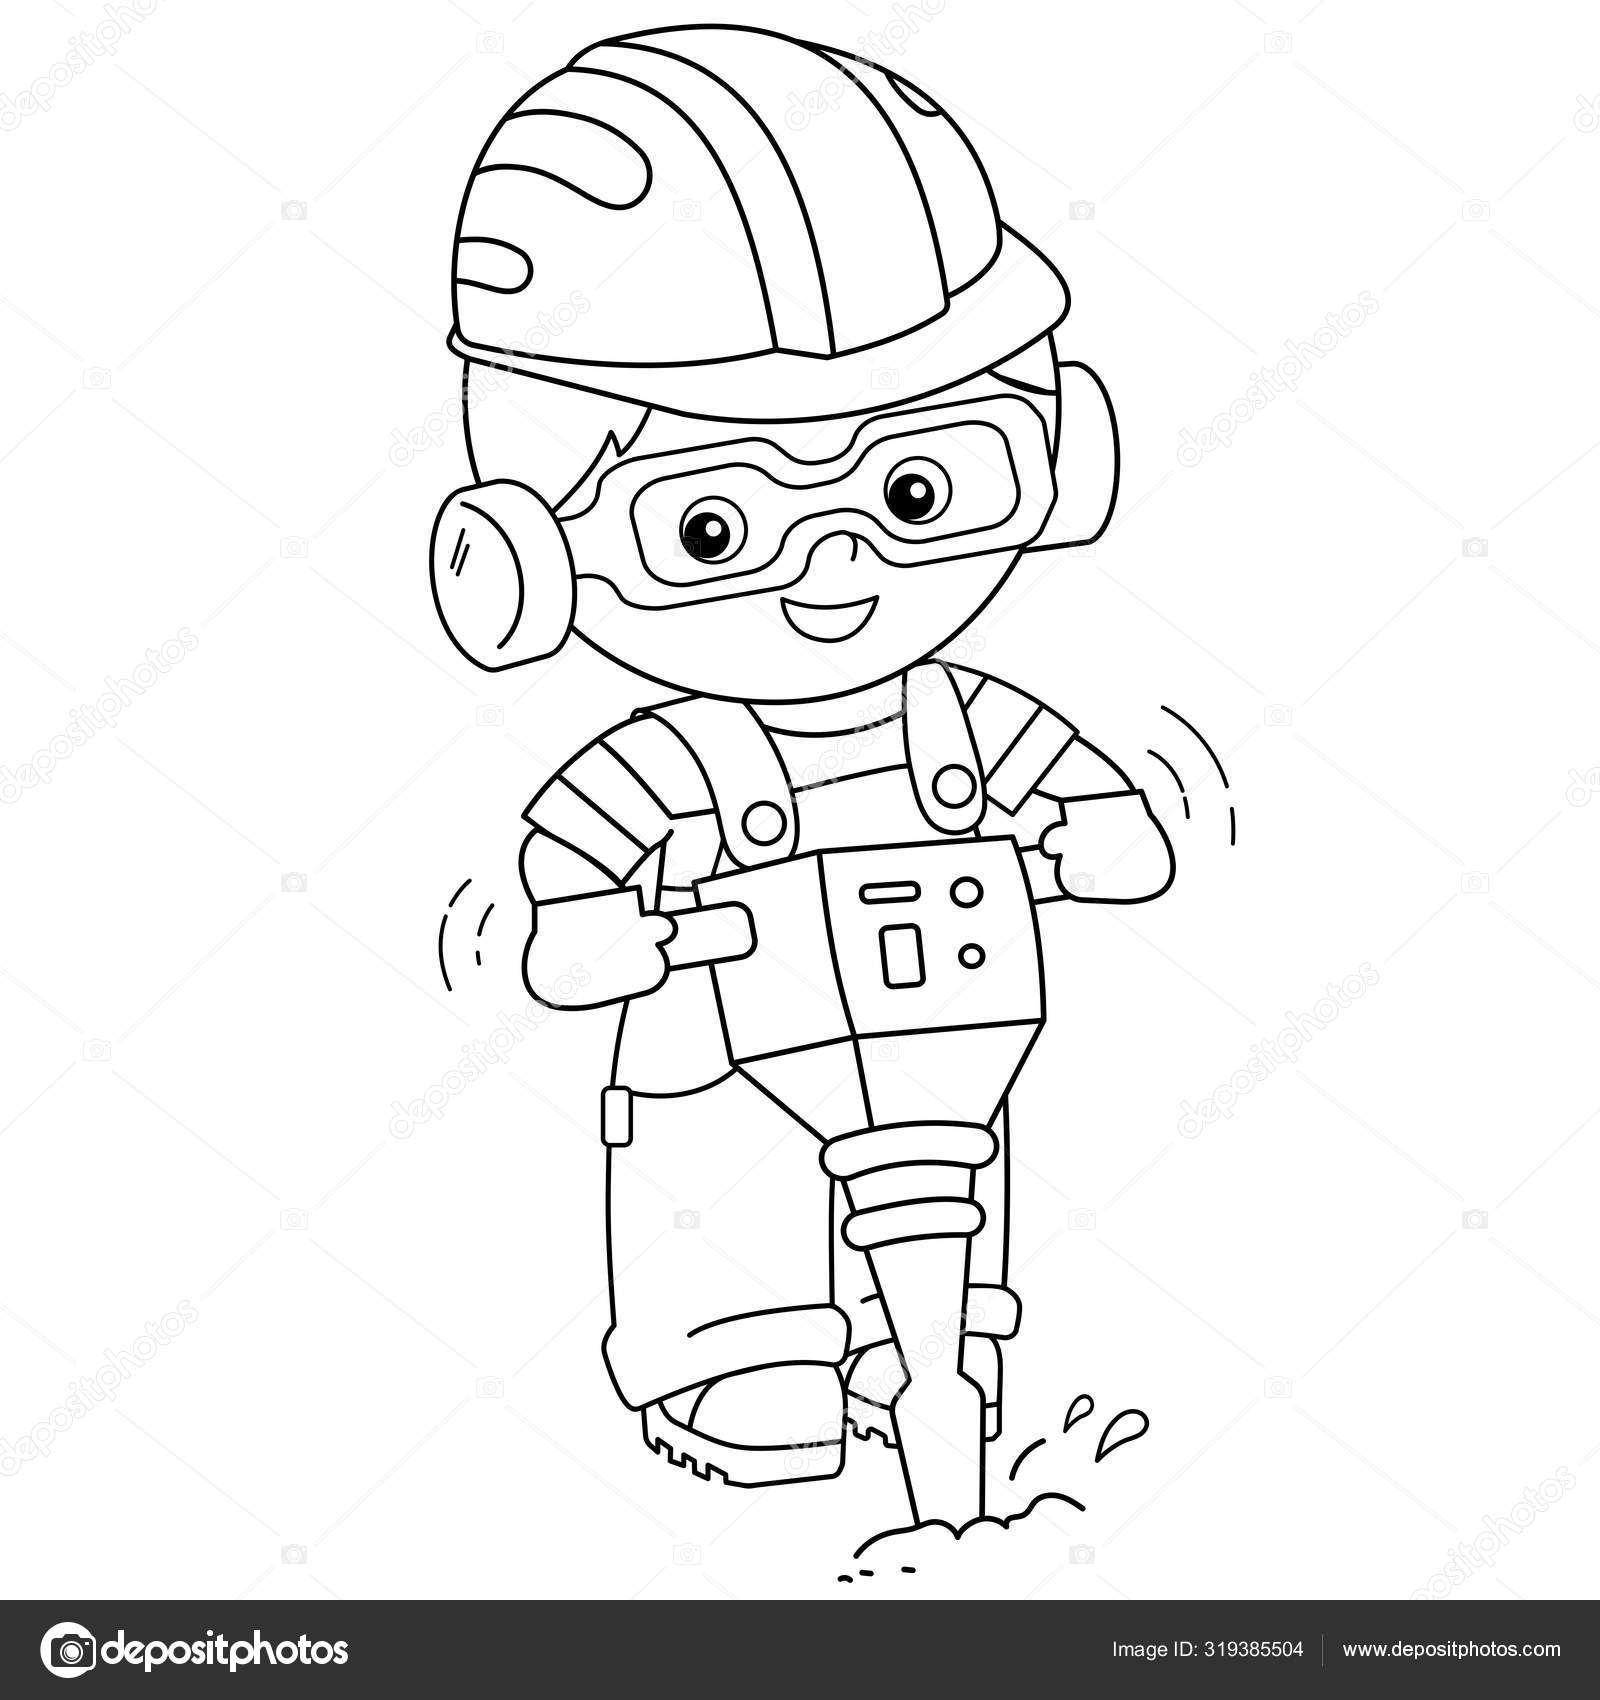 Coloring Page Outline Of Cartoon Builder With Jackhammer Profession Coloring Book For Kids Vector Image By C Oleon17 Vector Stock 319385504